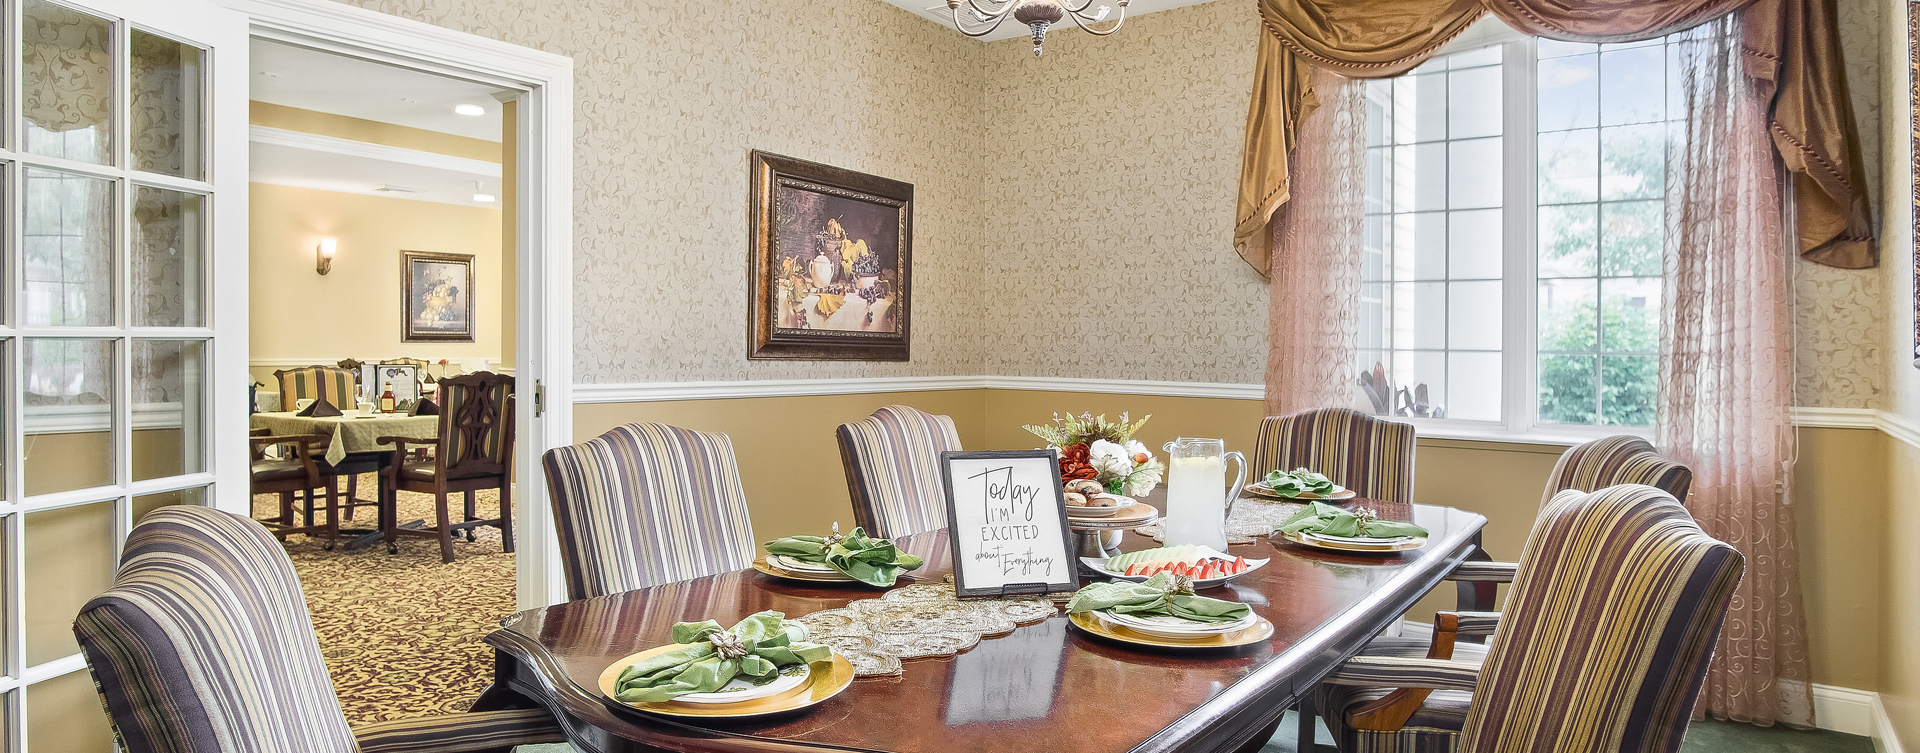 Food is best when shared with family and friends in the private dining room at Bickford of Overland Park